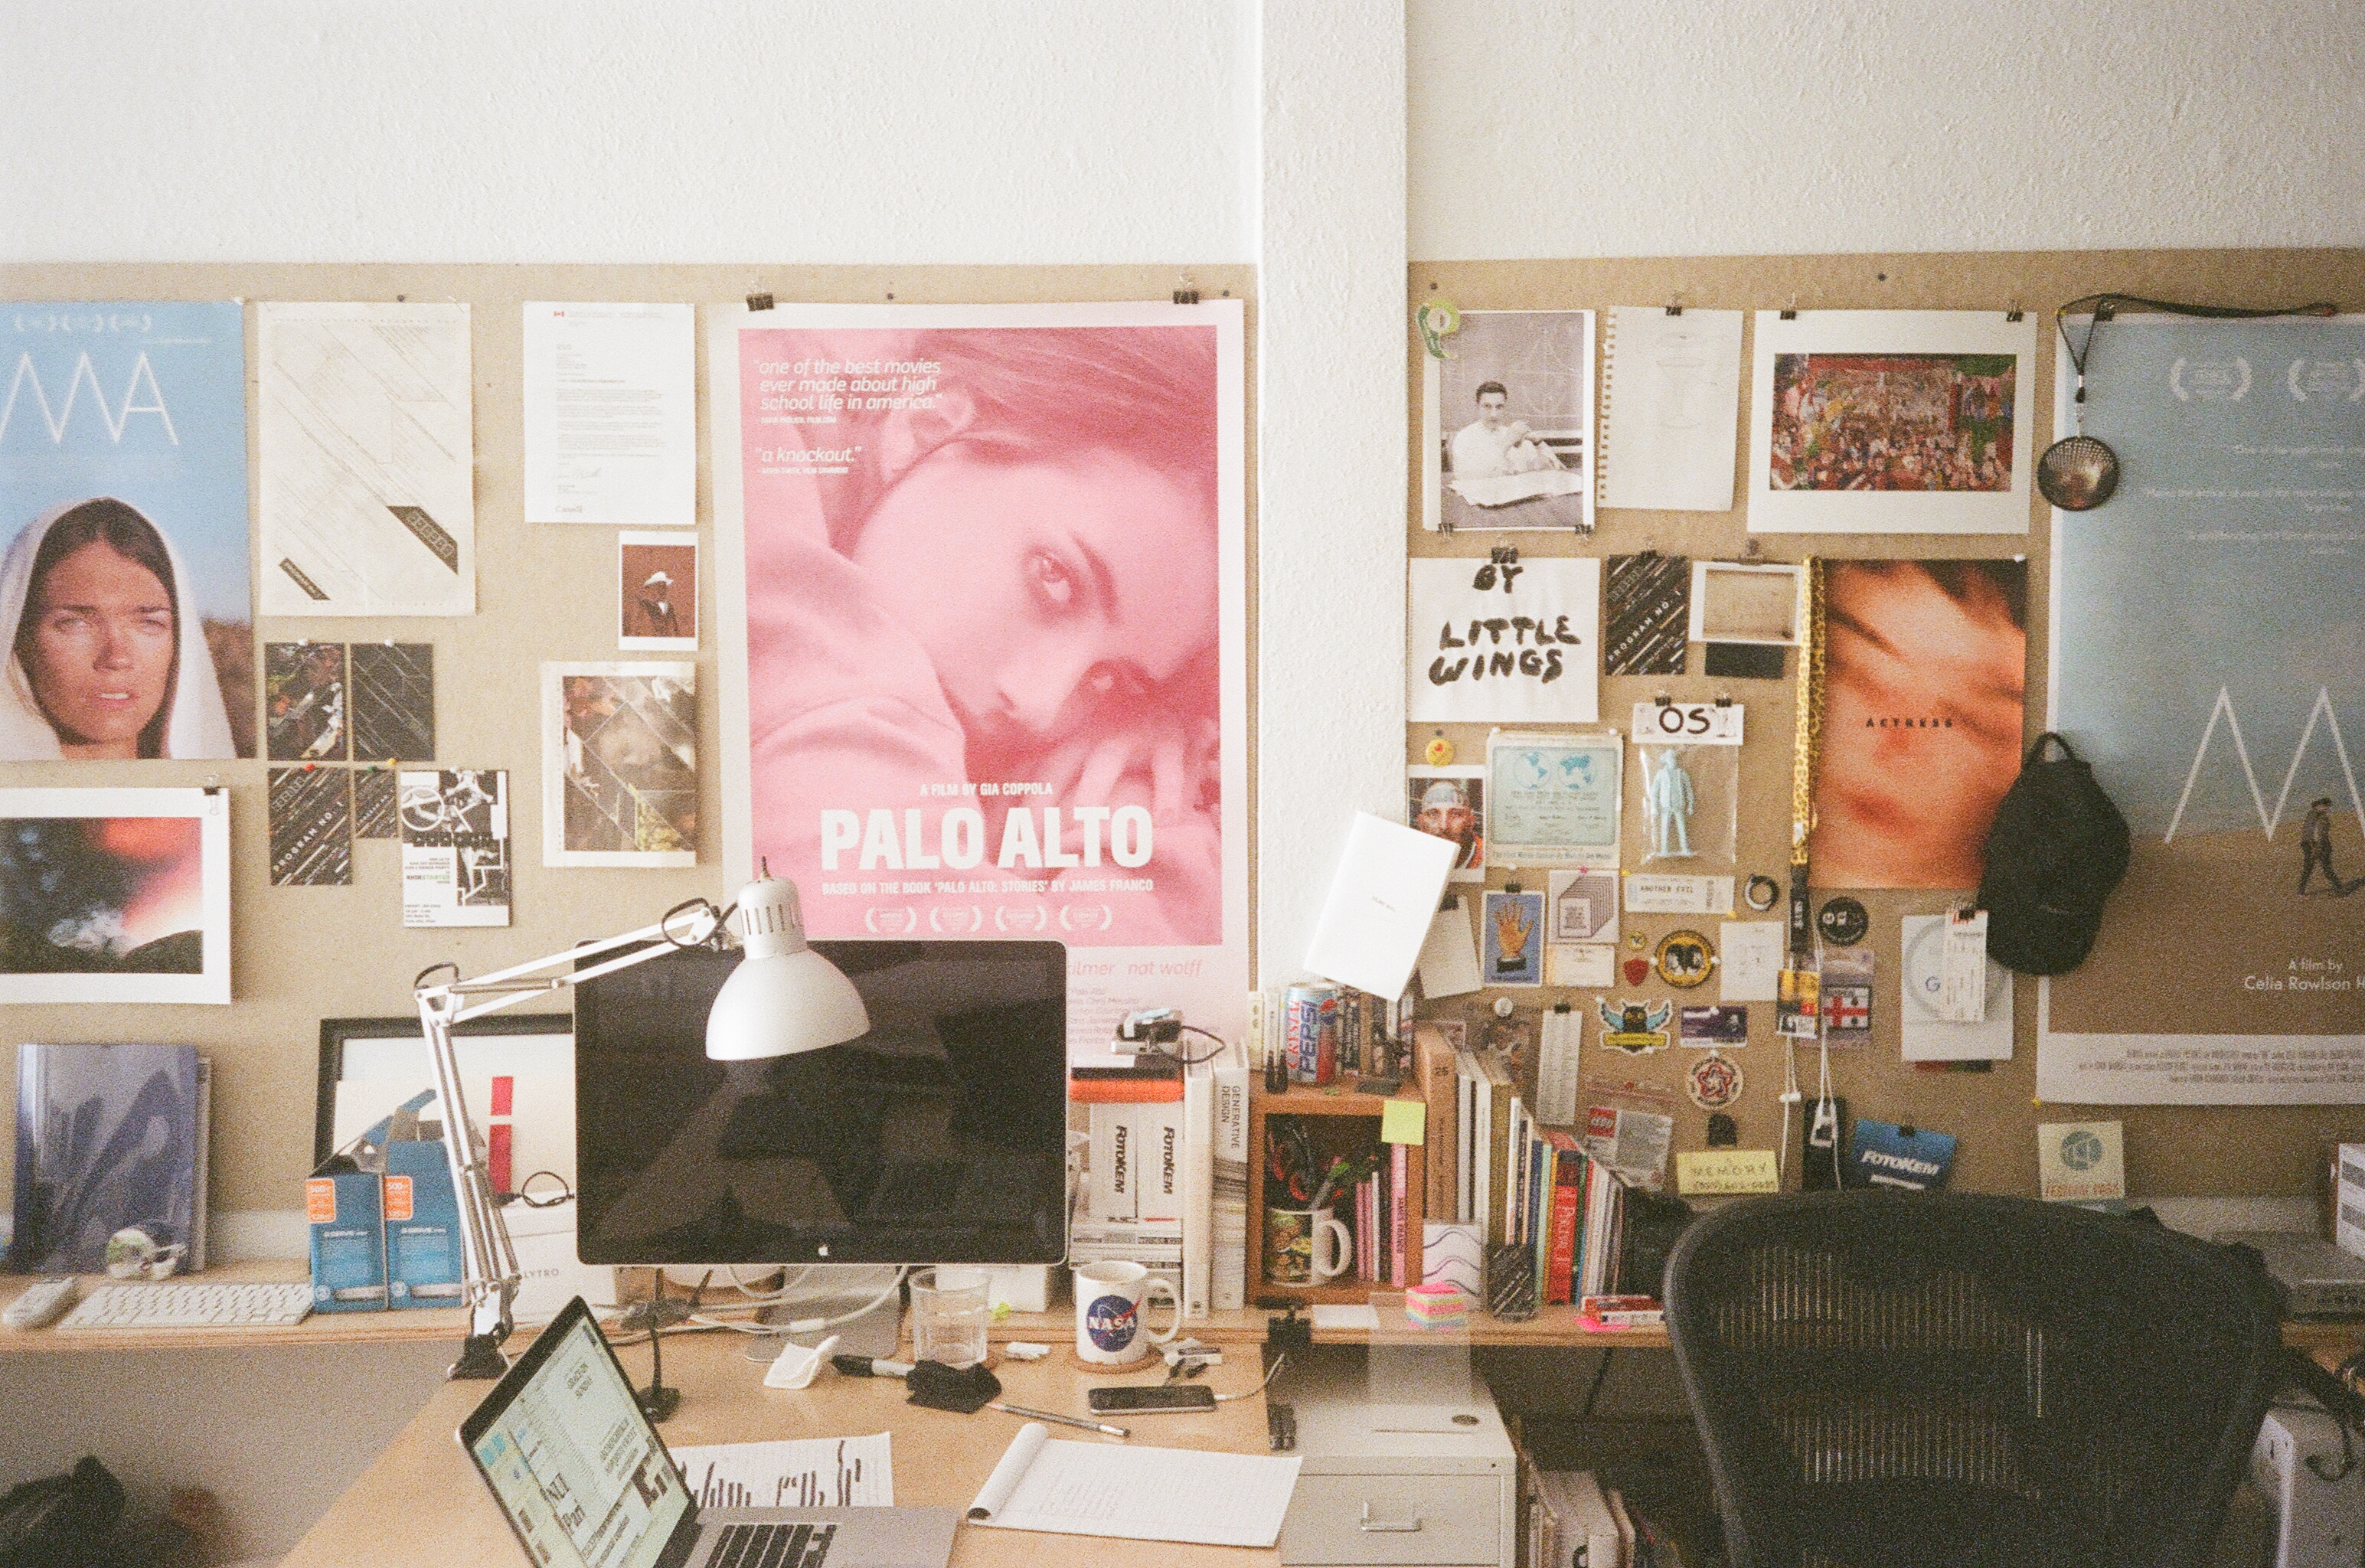 Photograph of a desk and bulletin boards filled with posters and postcards from Memory films.